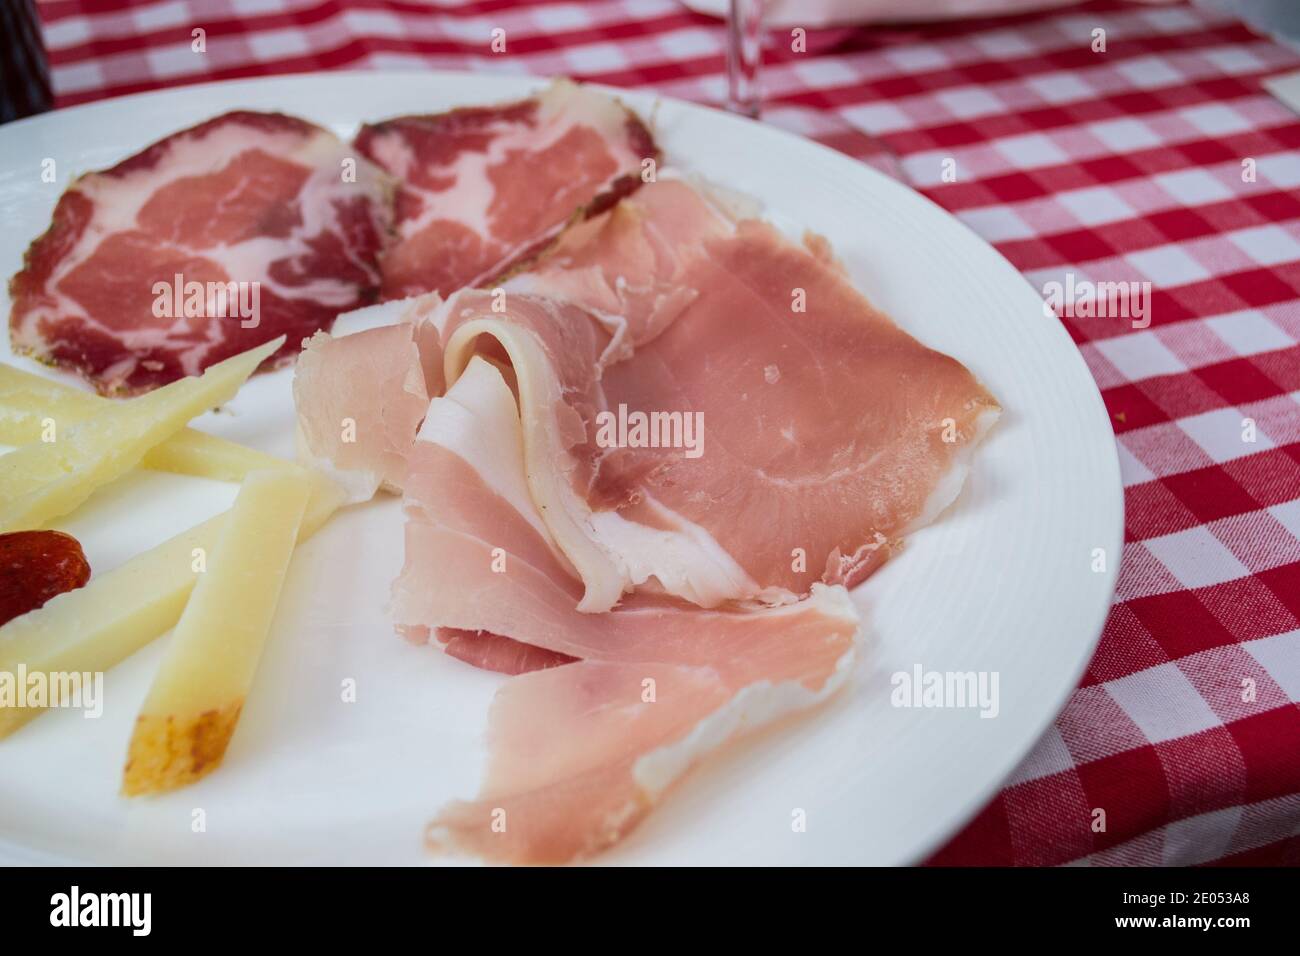 White plate on red and white tablecloth, cheese, sliced meats, appetizer snack plate, picnic, prosciutto Stock Photo